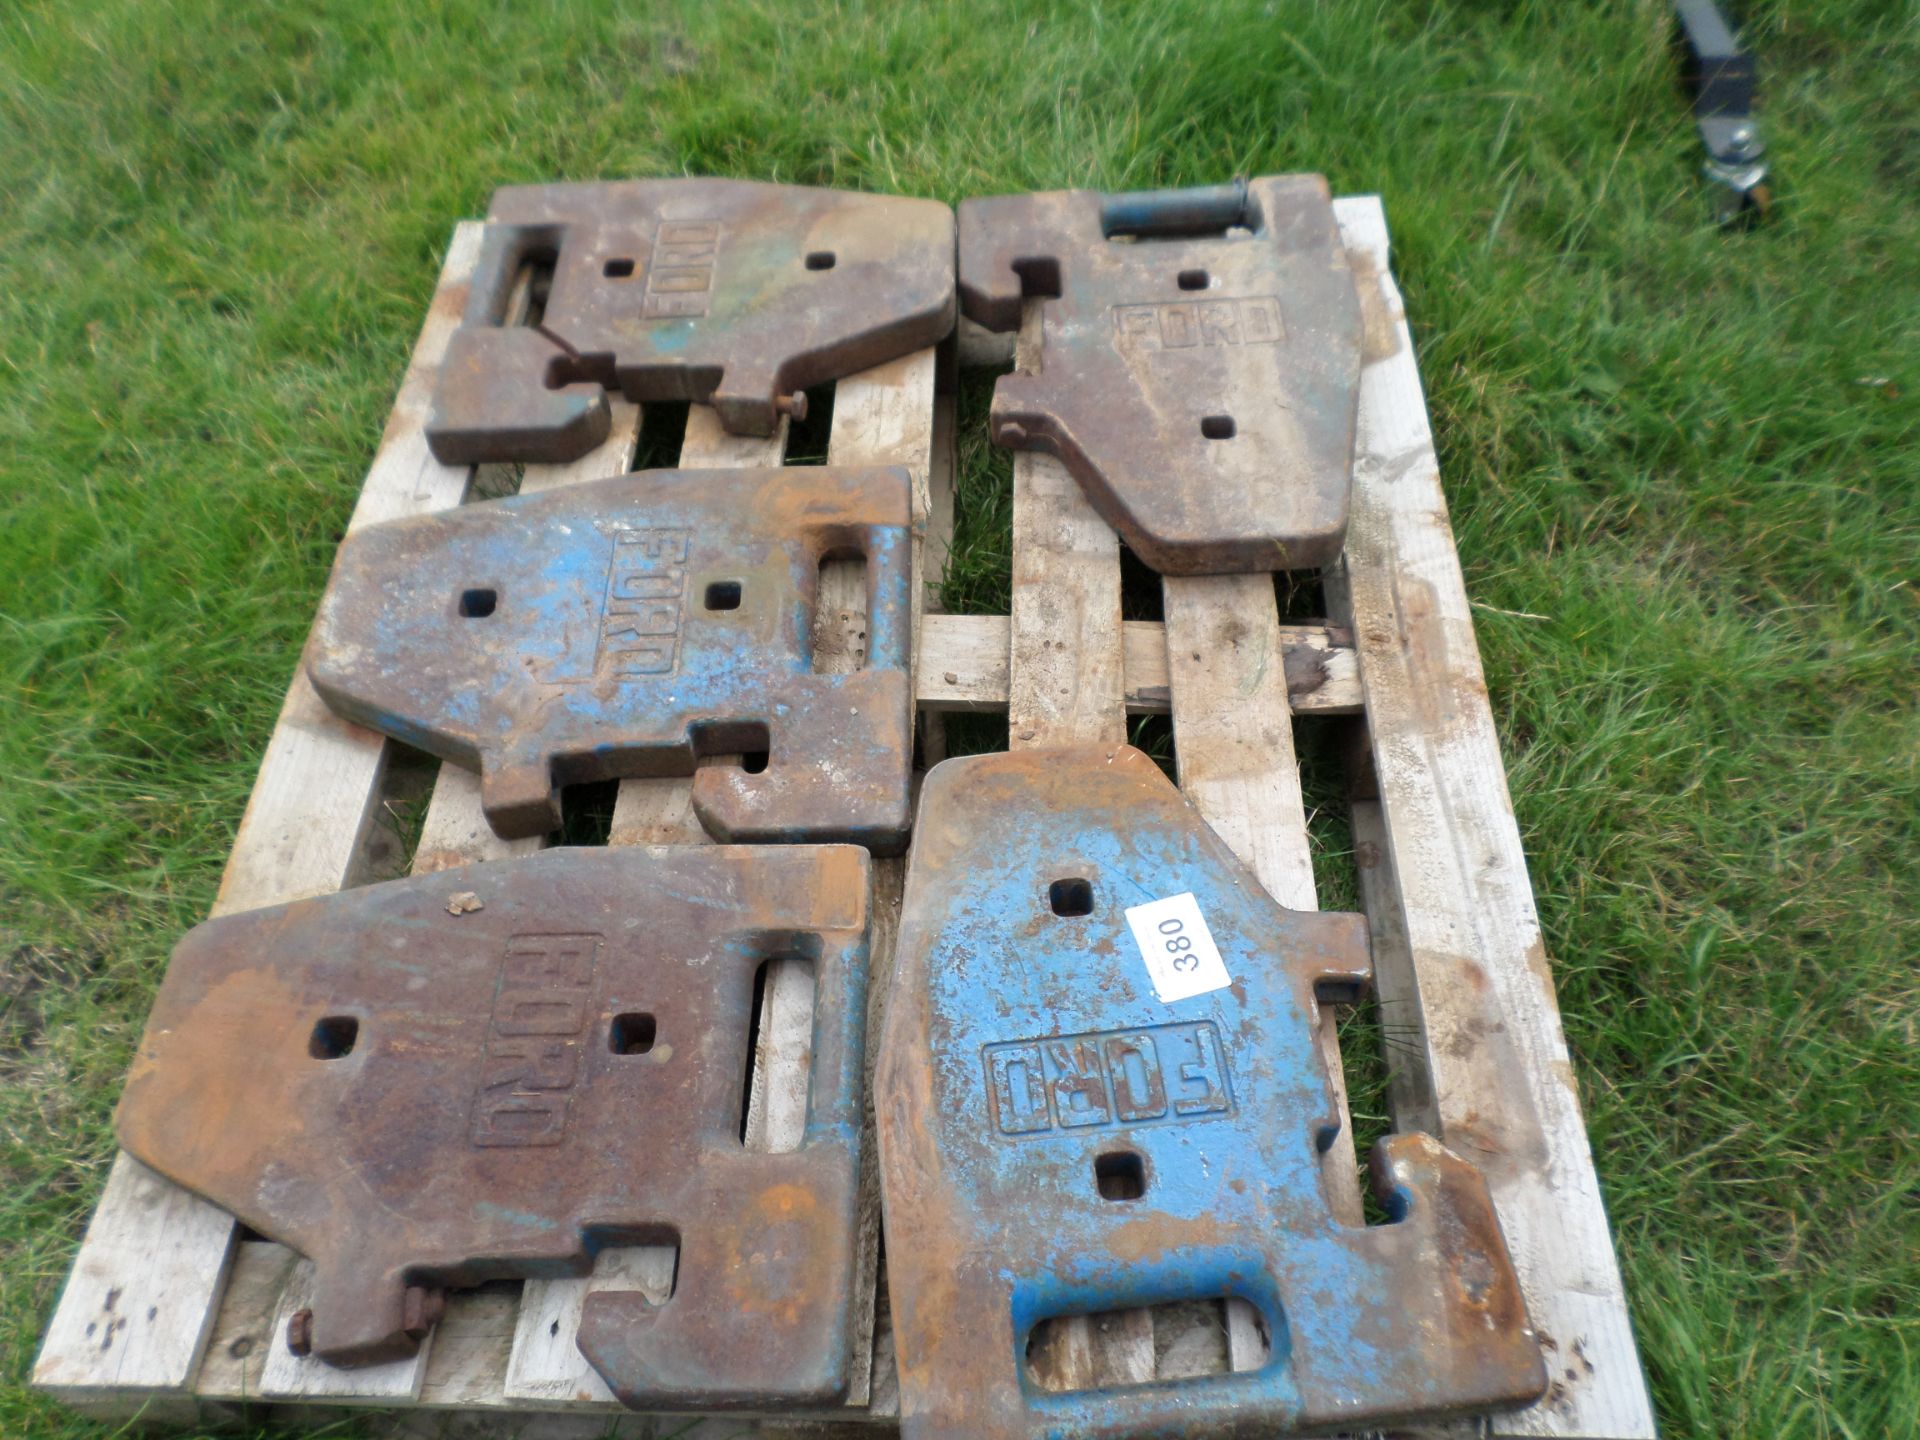 Ford tractor weights x 5 (one cracked)